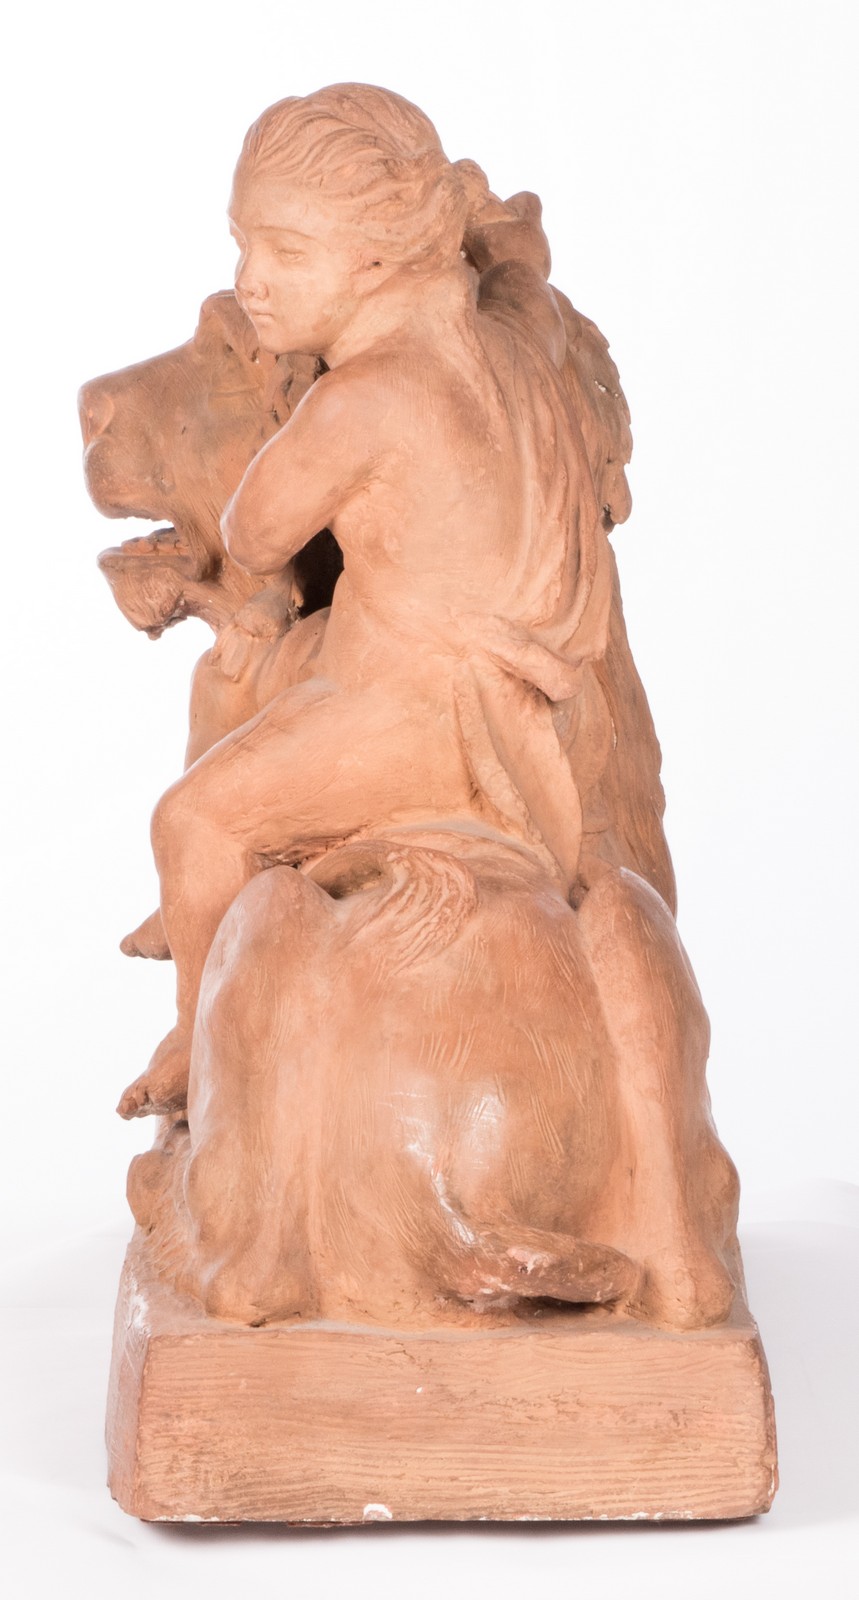 A large pair of terracotta sculptures depicting an allegoric scene, 19thC, H 78 - B 97 - D 35 cm - Image 5 of 62